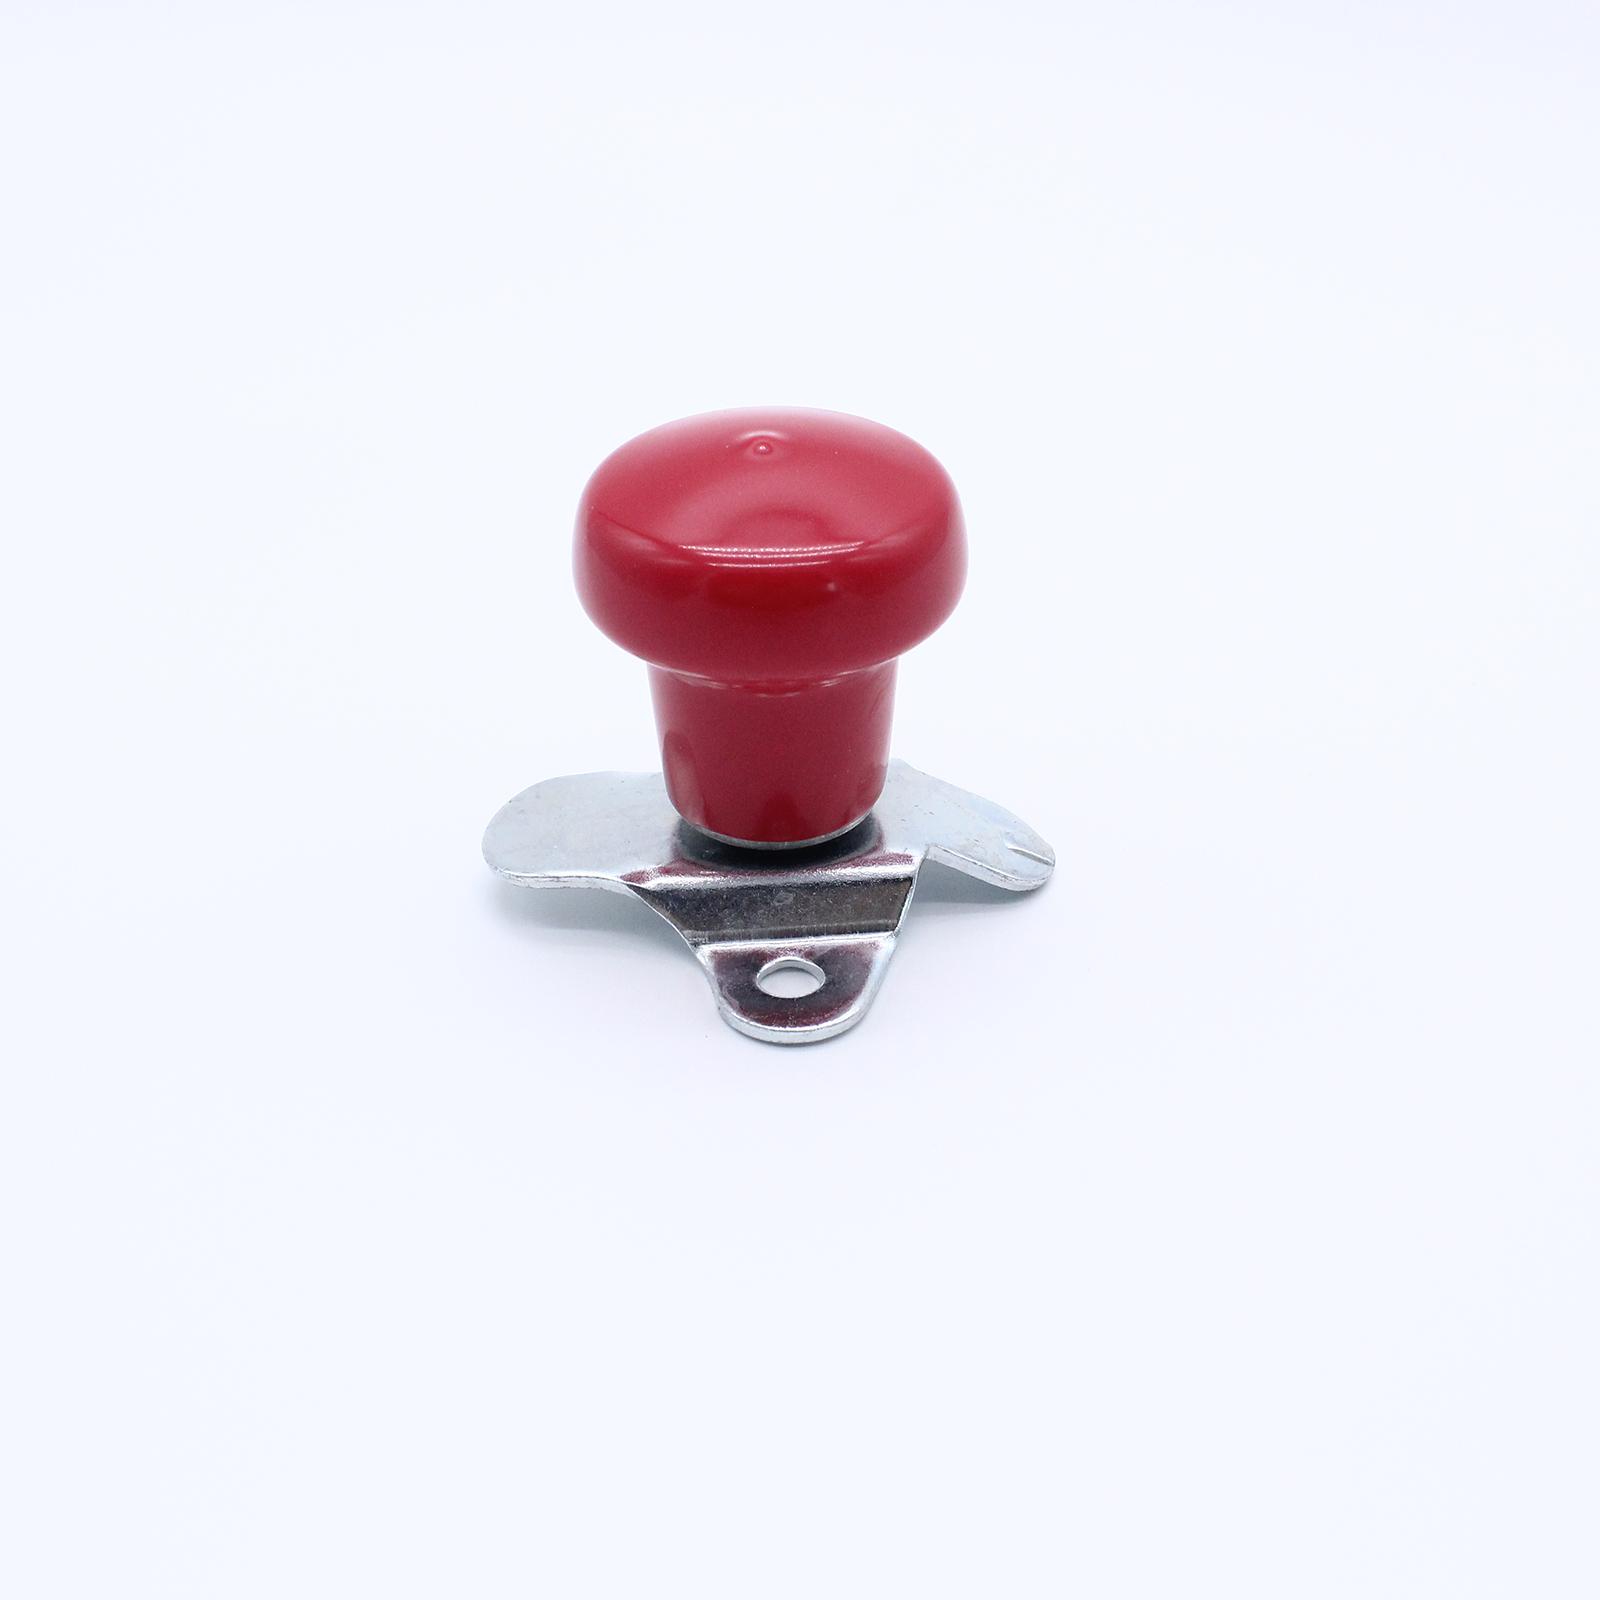 Steering Wheel Spinner Knob Accessories Car Ball for Tractors Boats